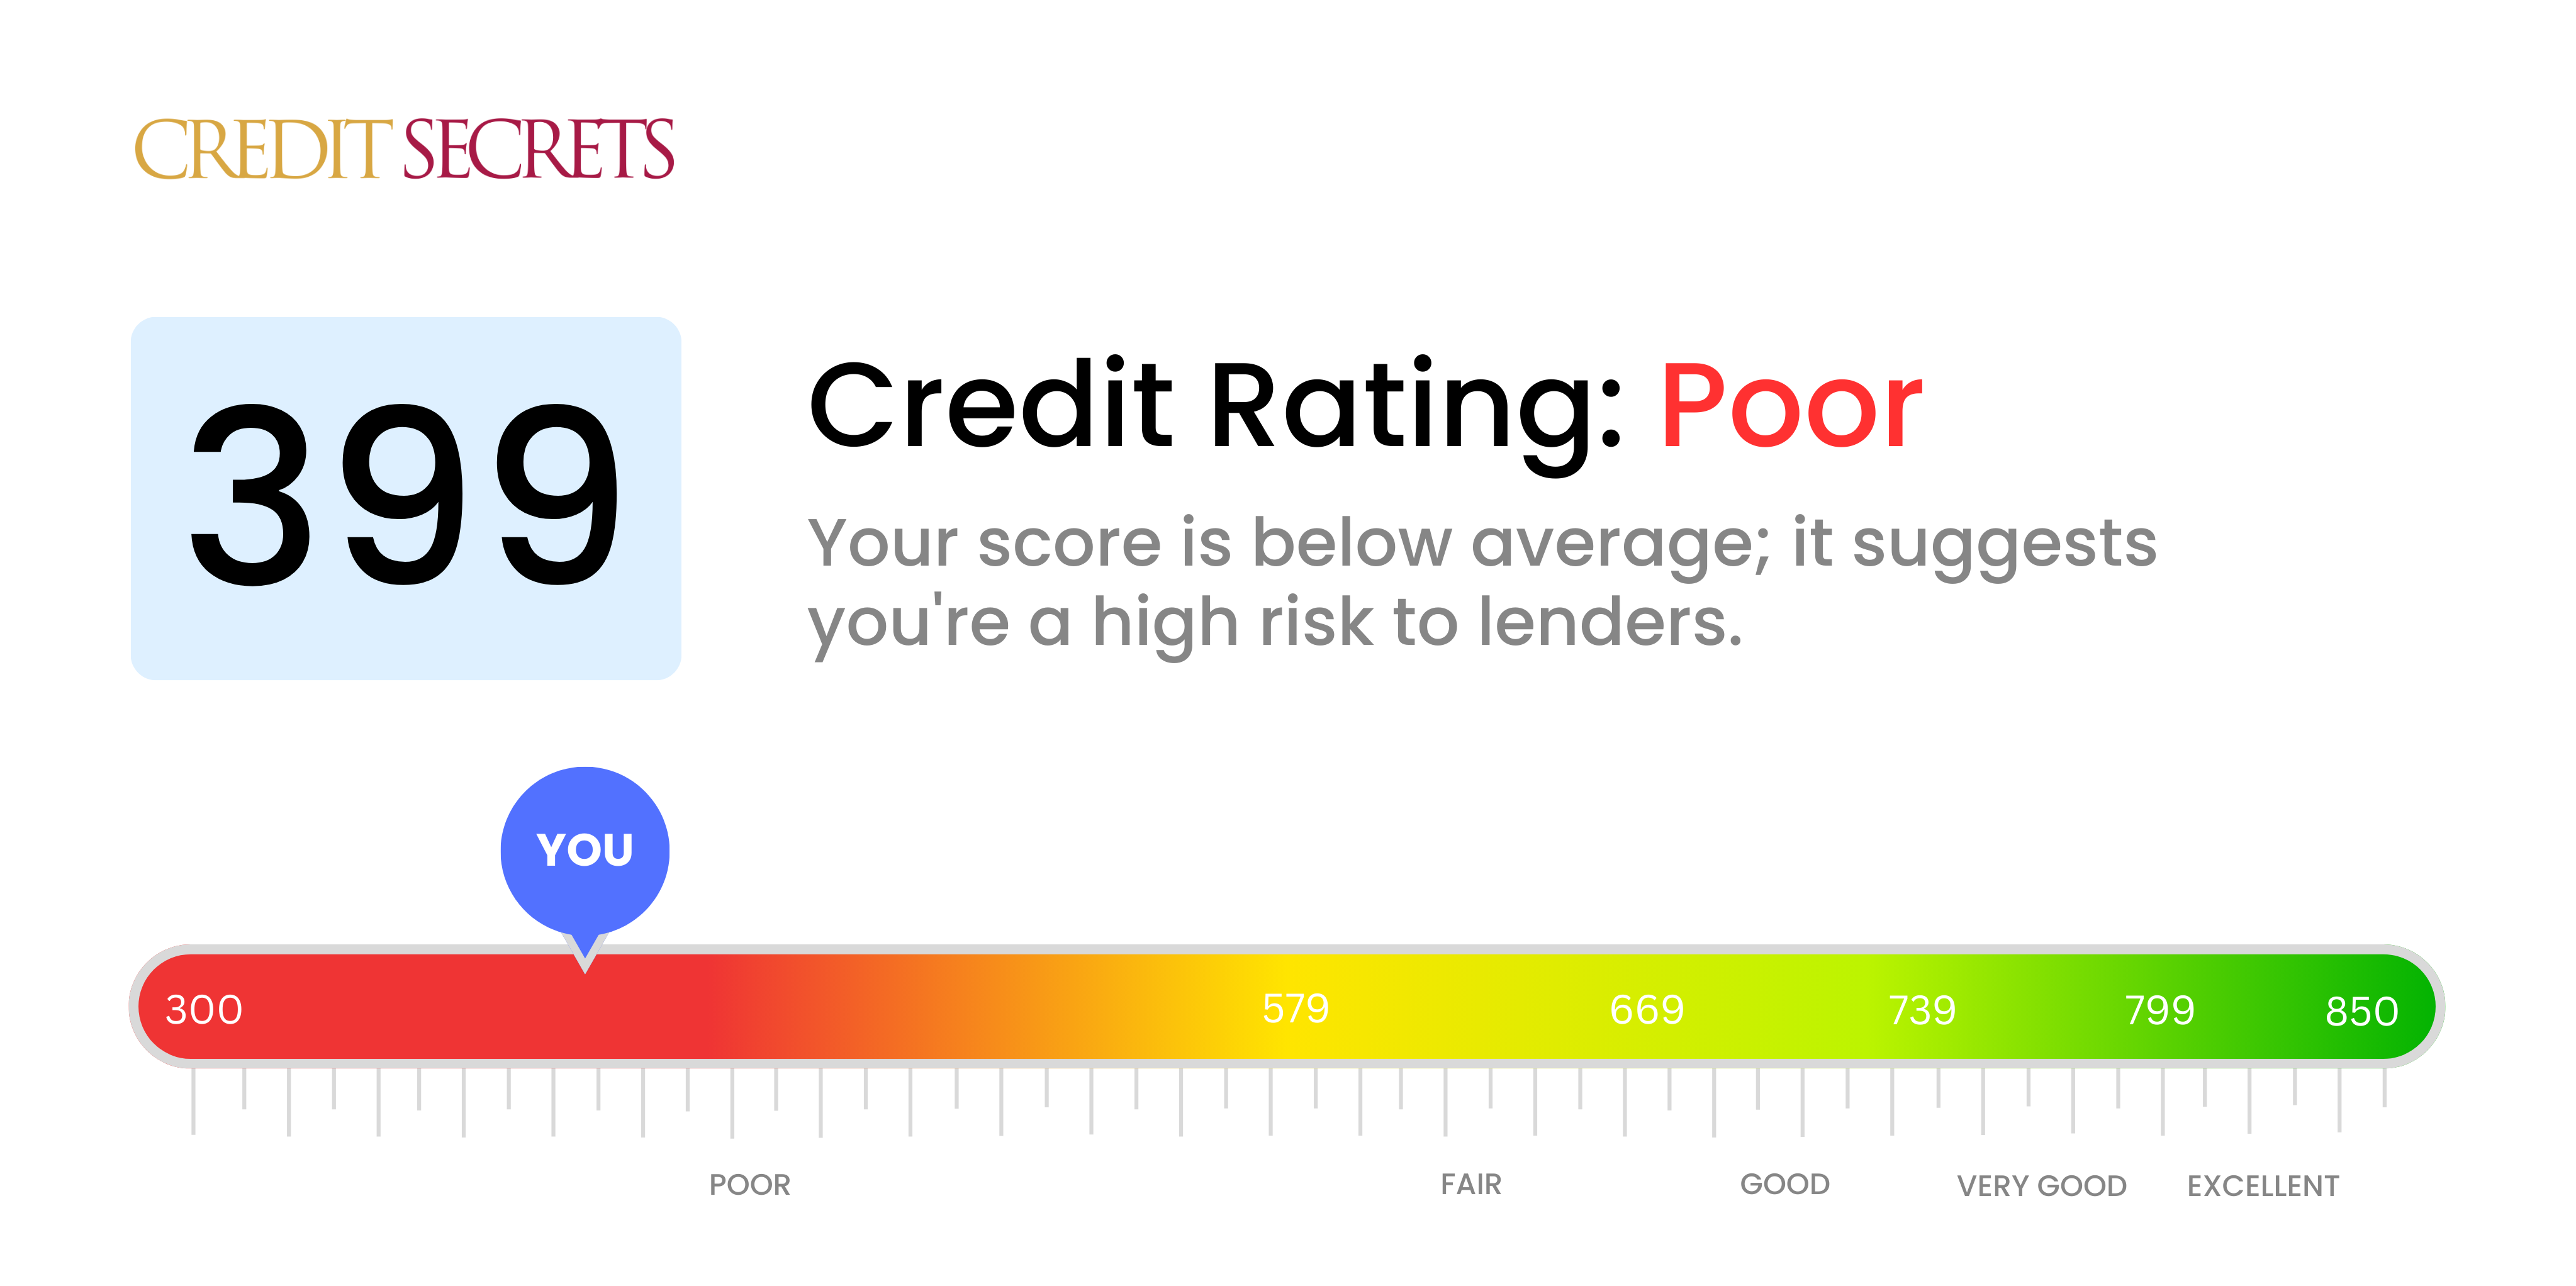 Is 399 a good credit score?